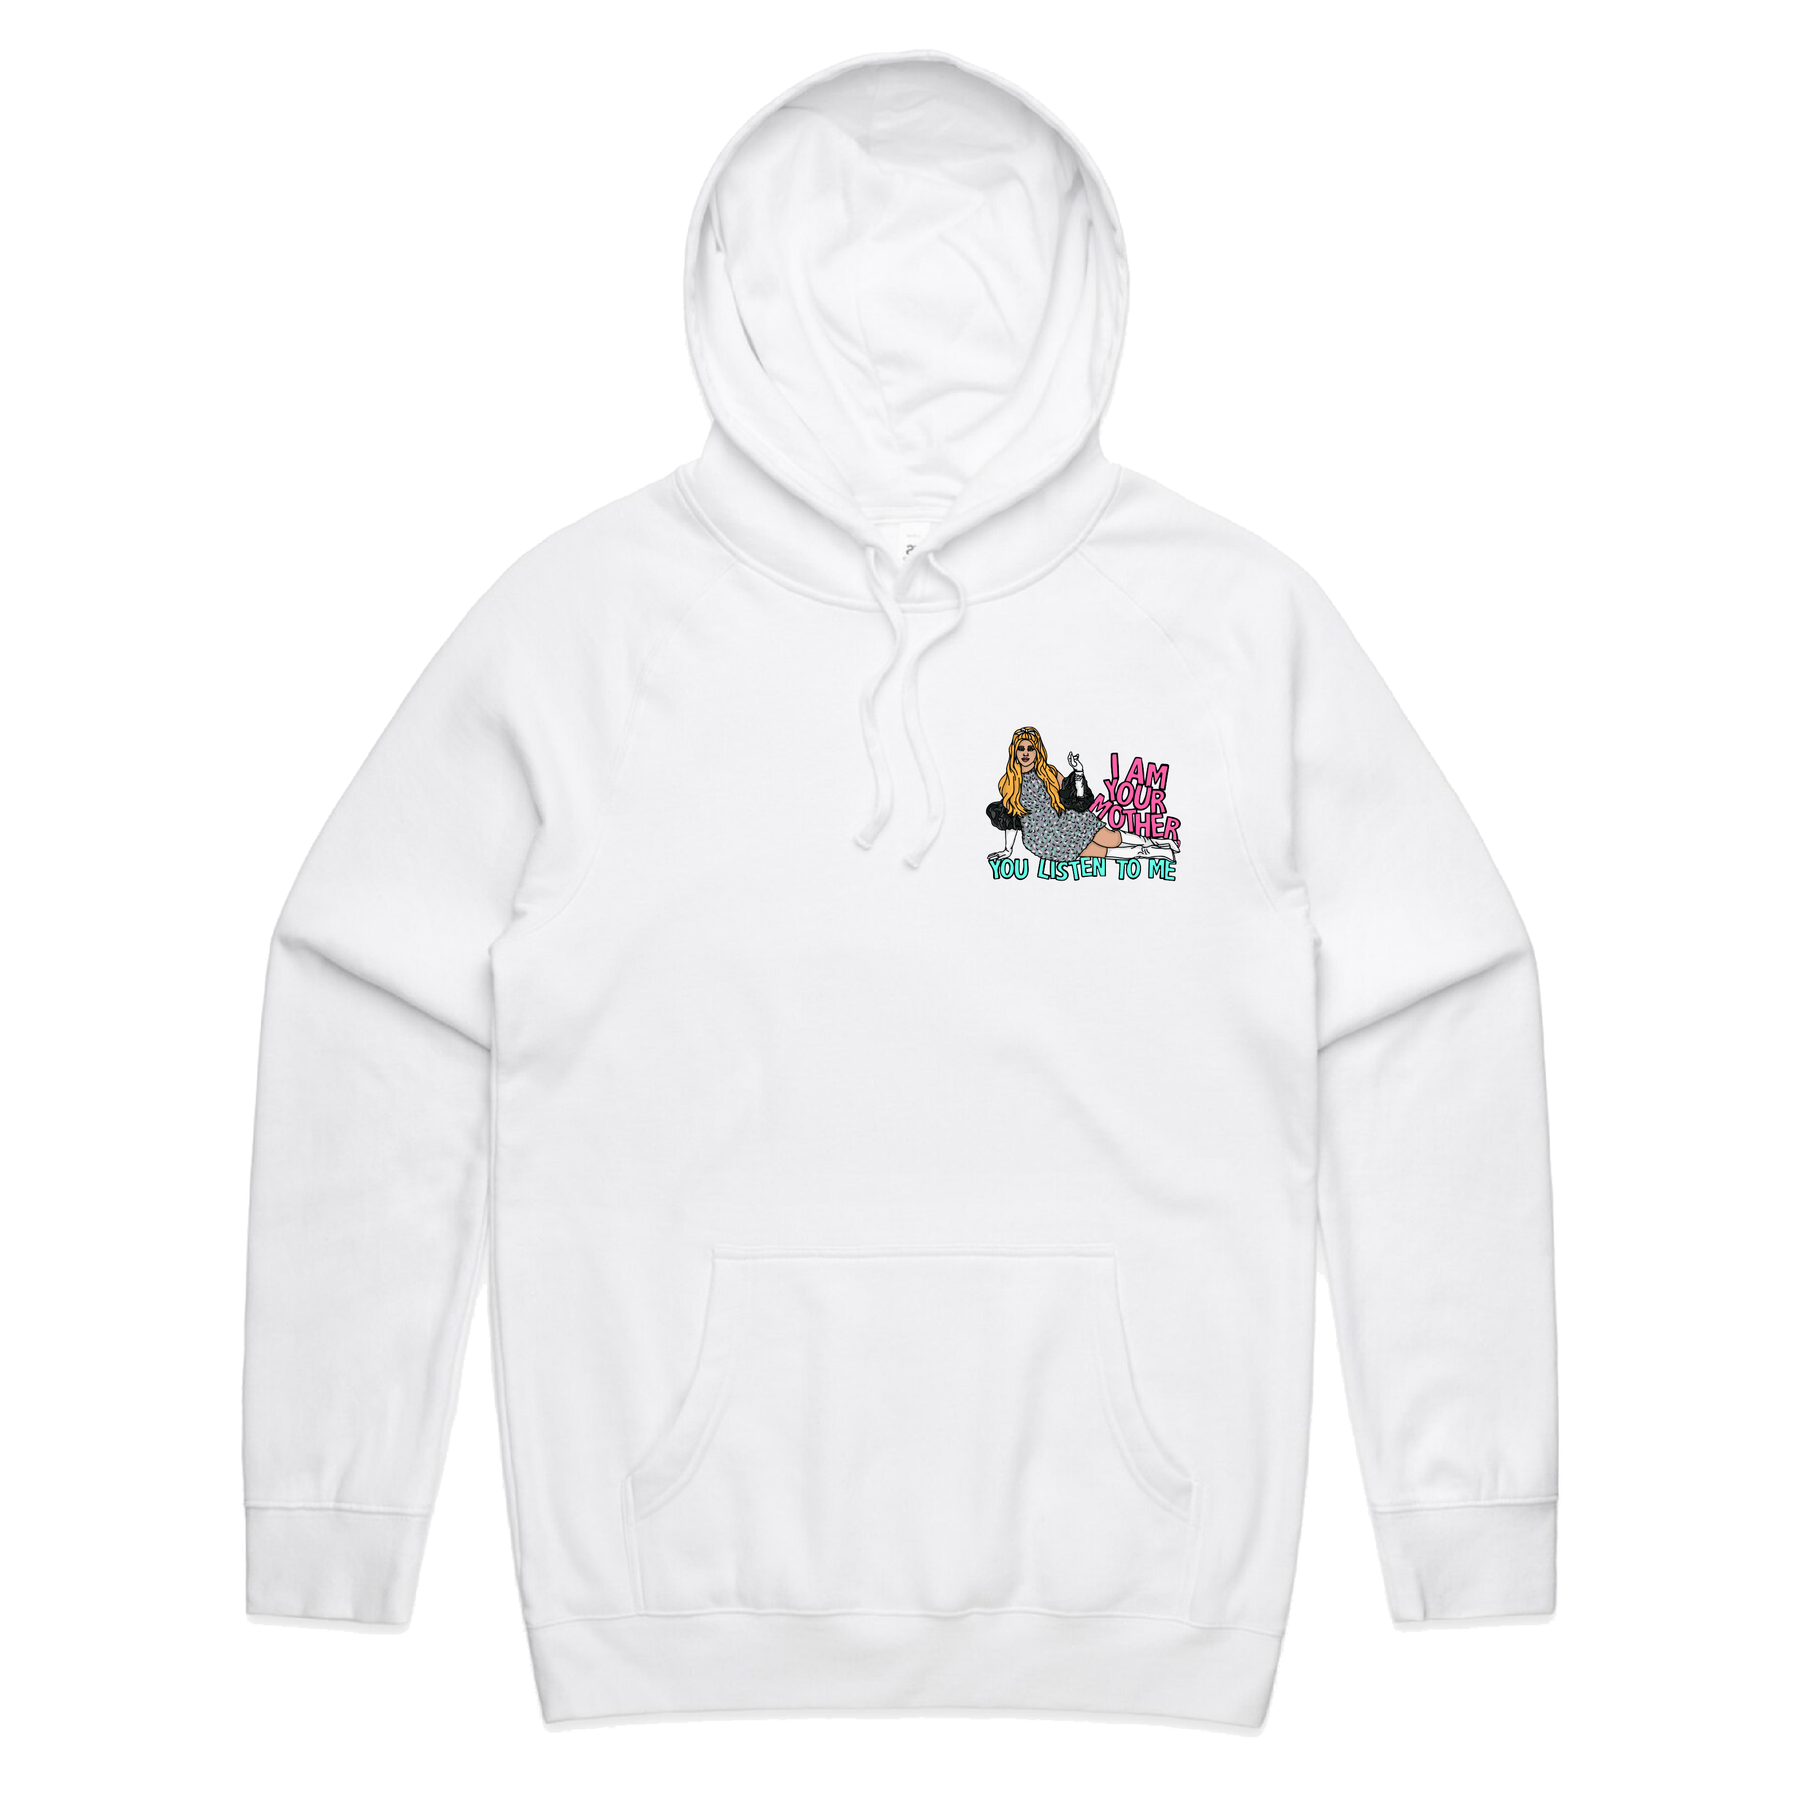 S / White / Small Front Print You Listen To Me 🎤🎶 - Unisex Hoodie